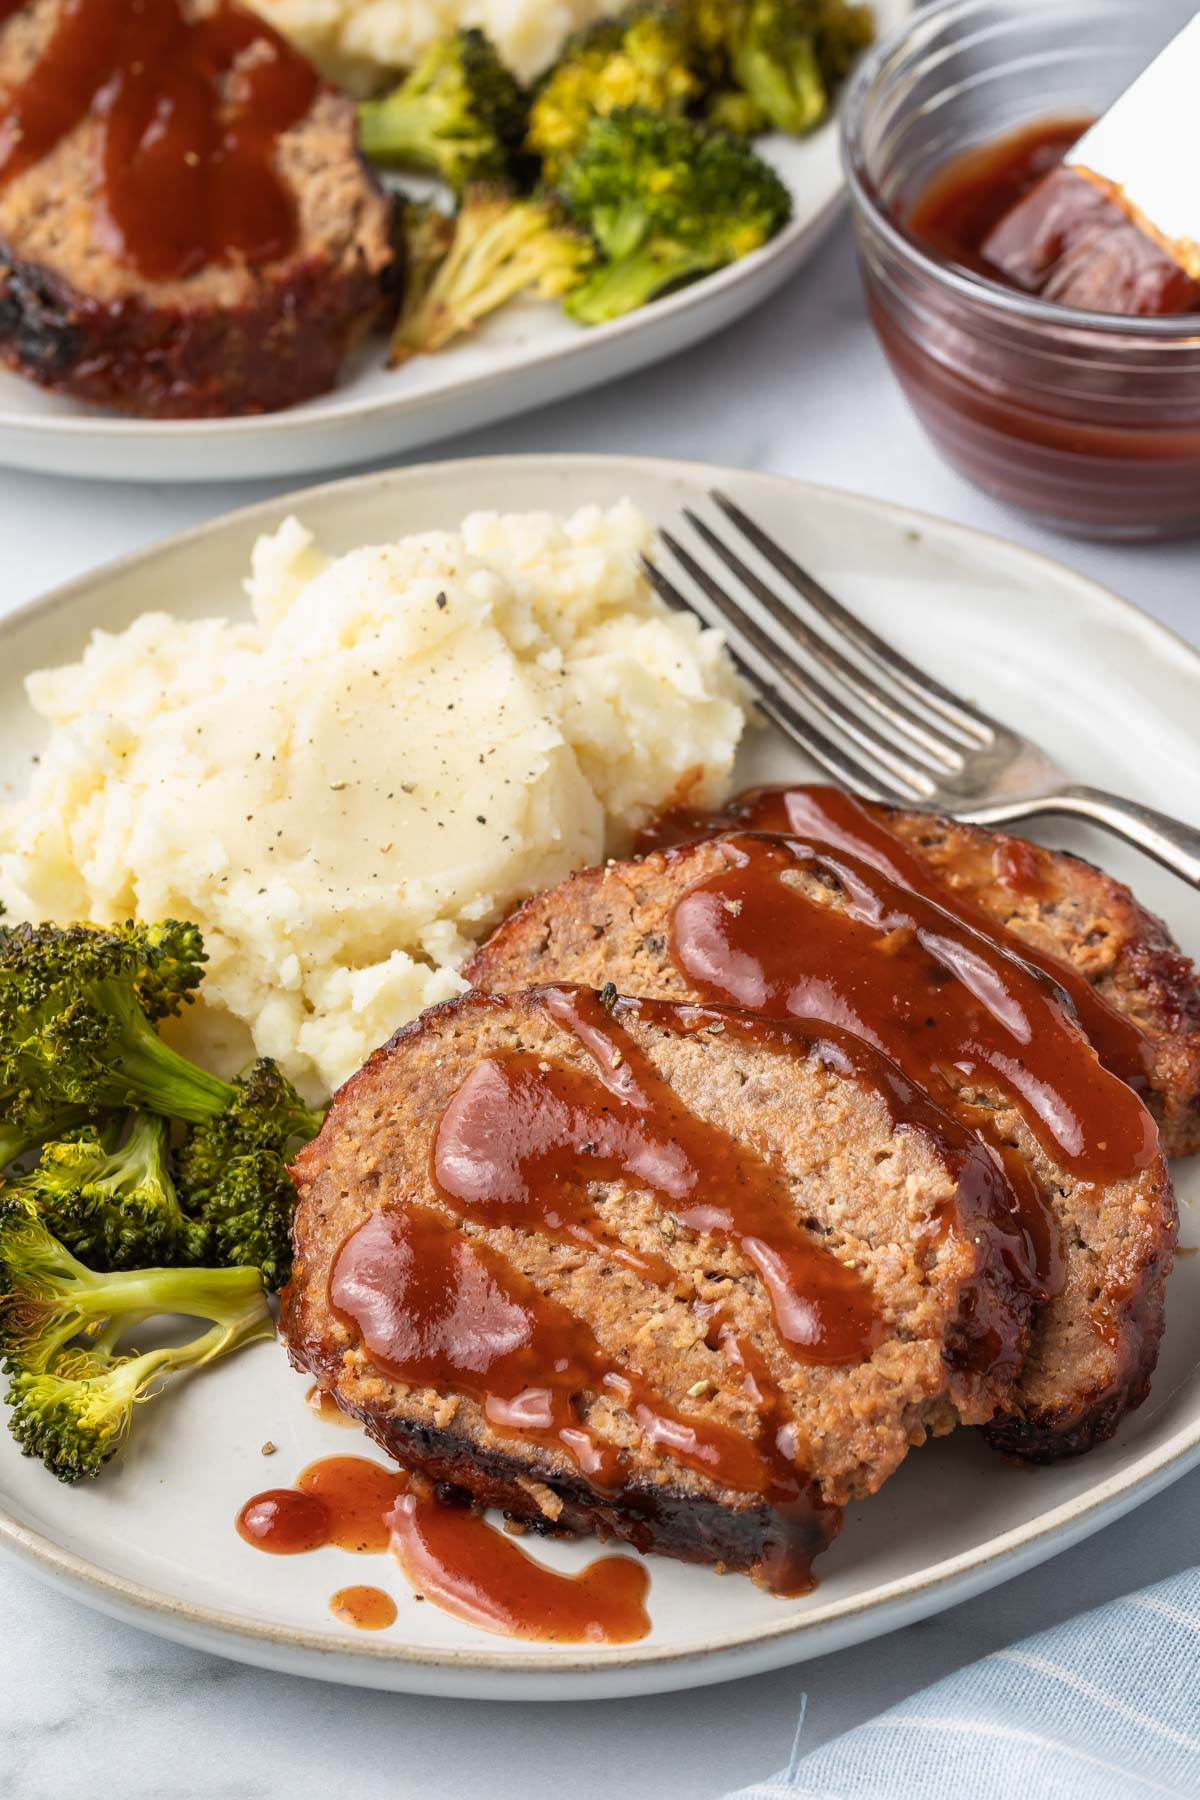 an upclose view of a plate with meatloaf, mashed potatoes and broccoli 